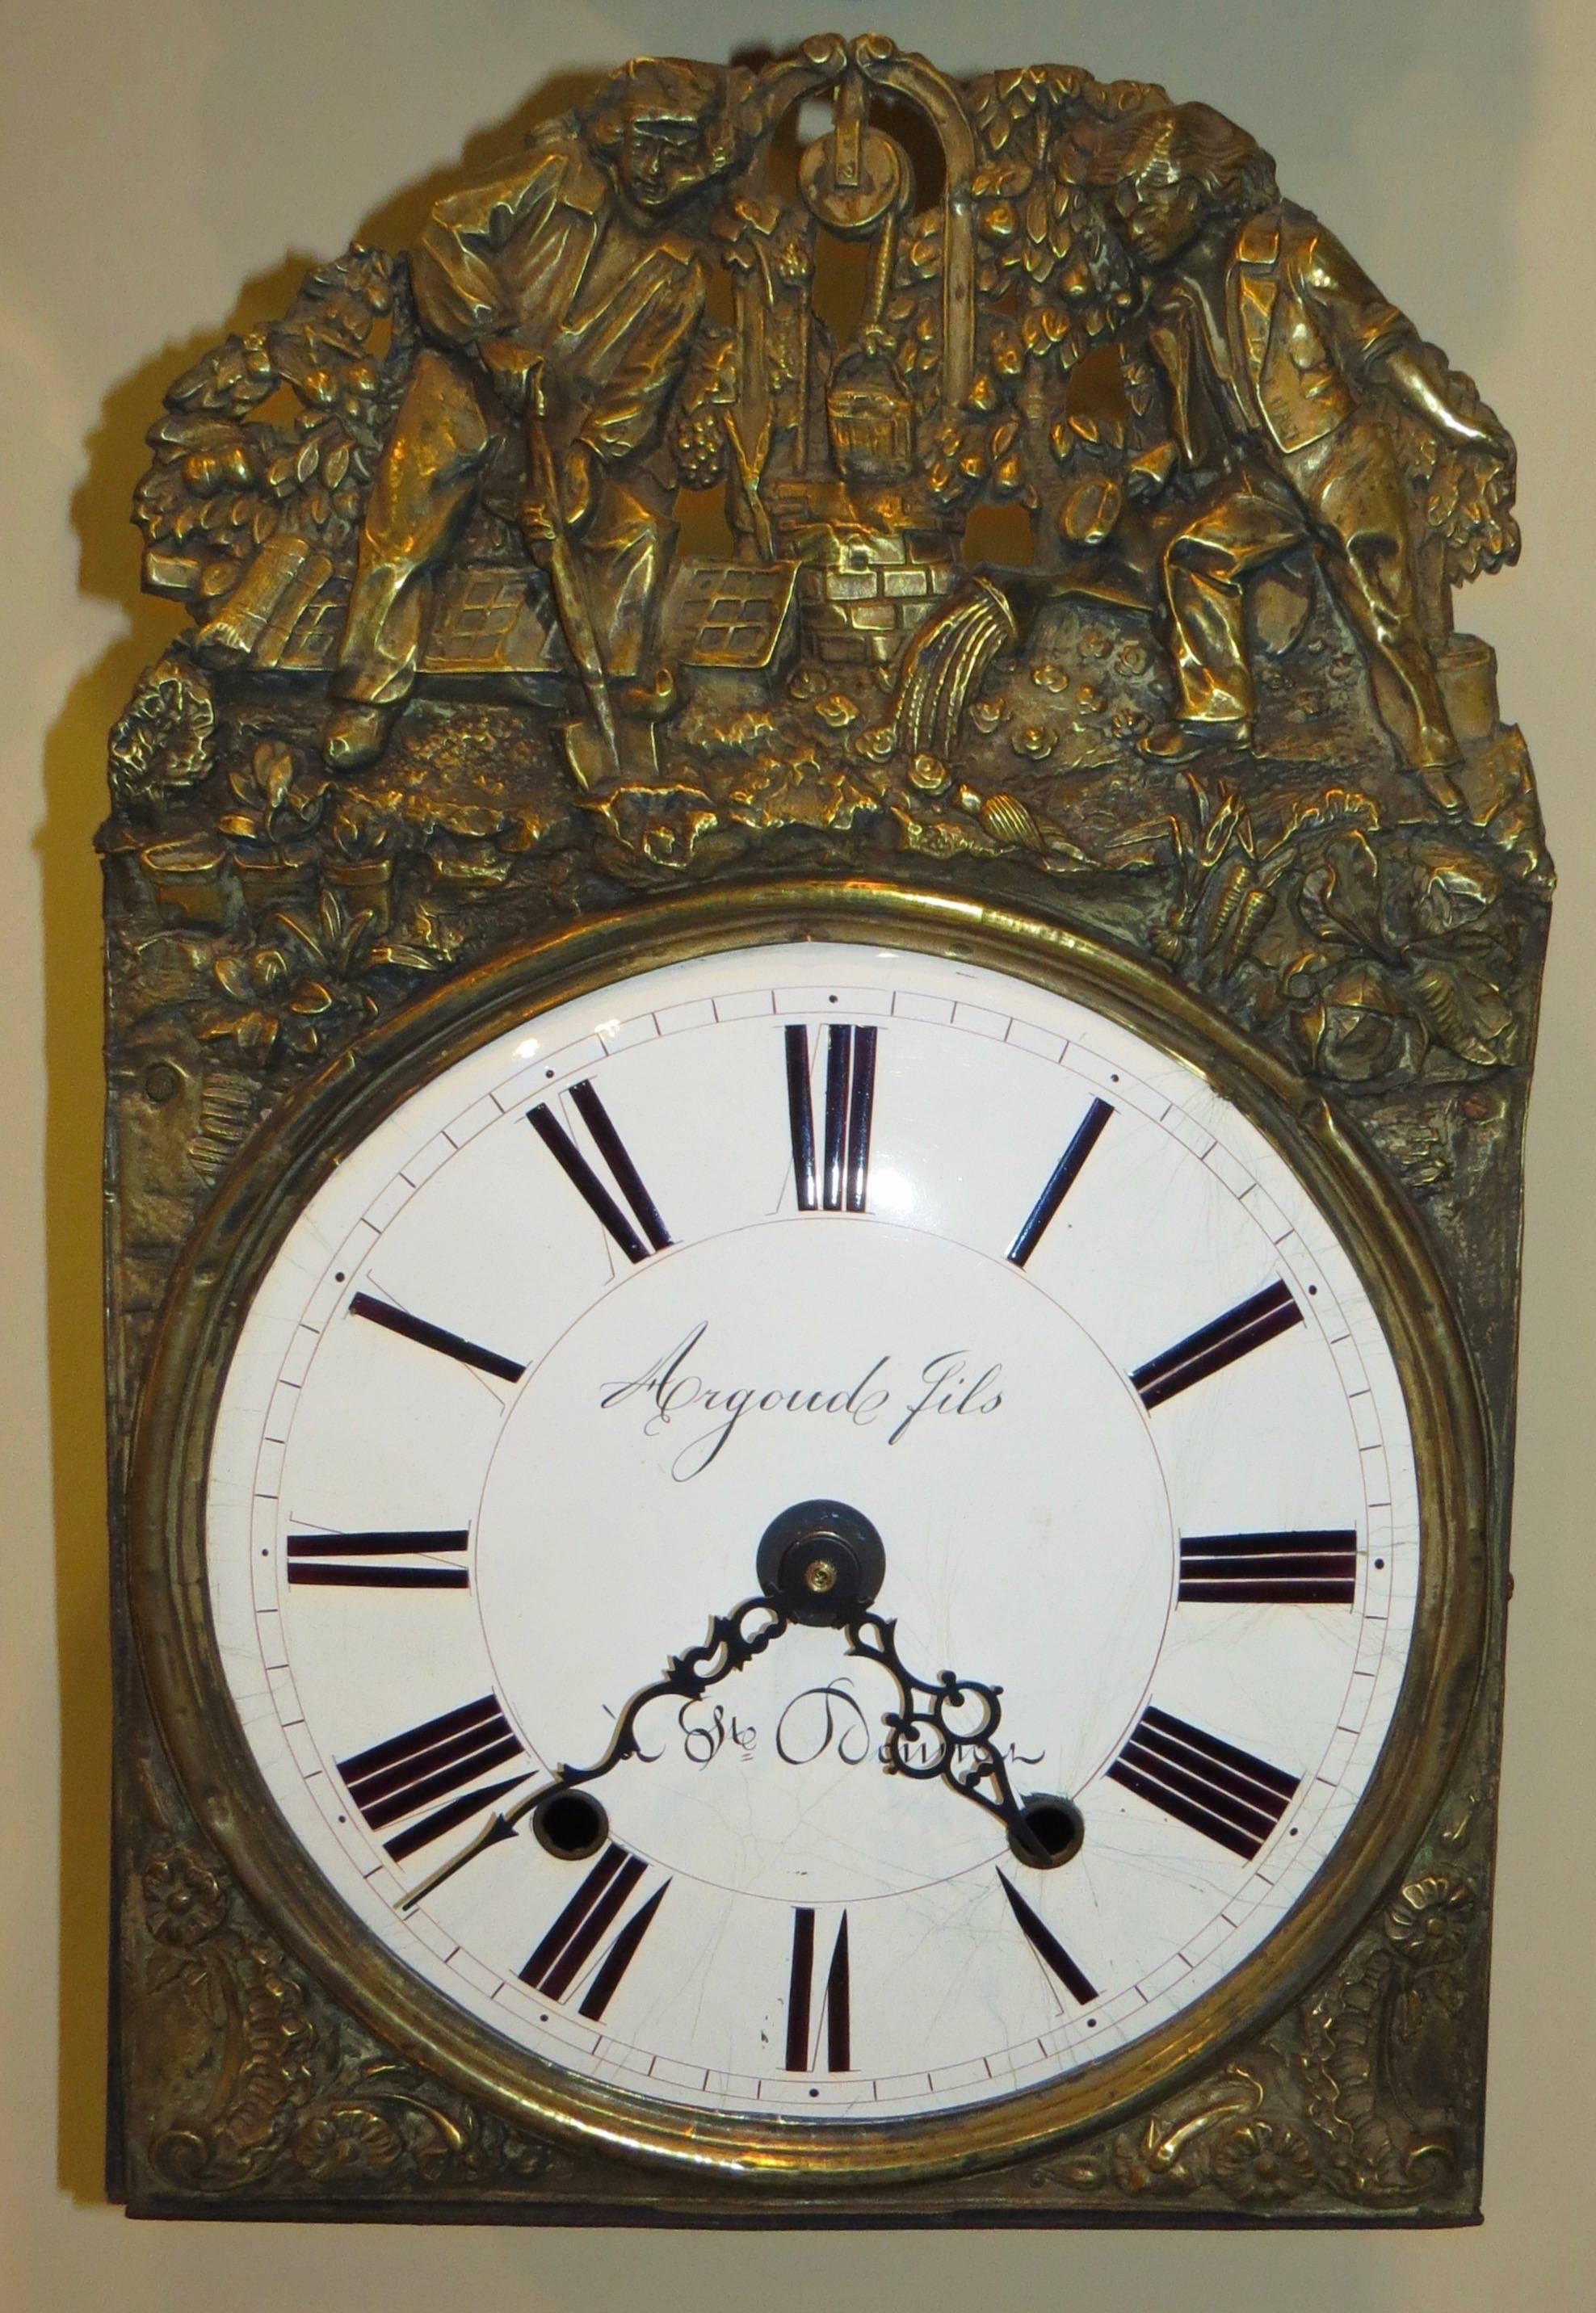 The 19th century repousse clock face decorates the housing of a new, quartz mechanism. It can hang on the wall or sit on a stack of books.